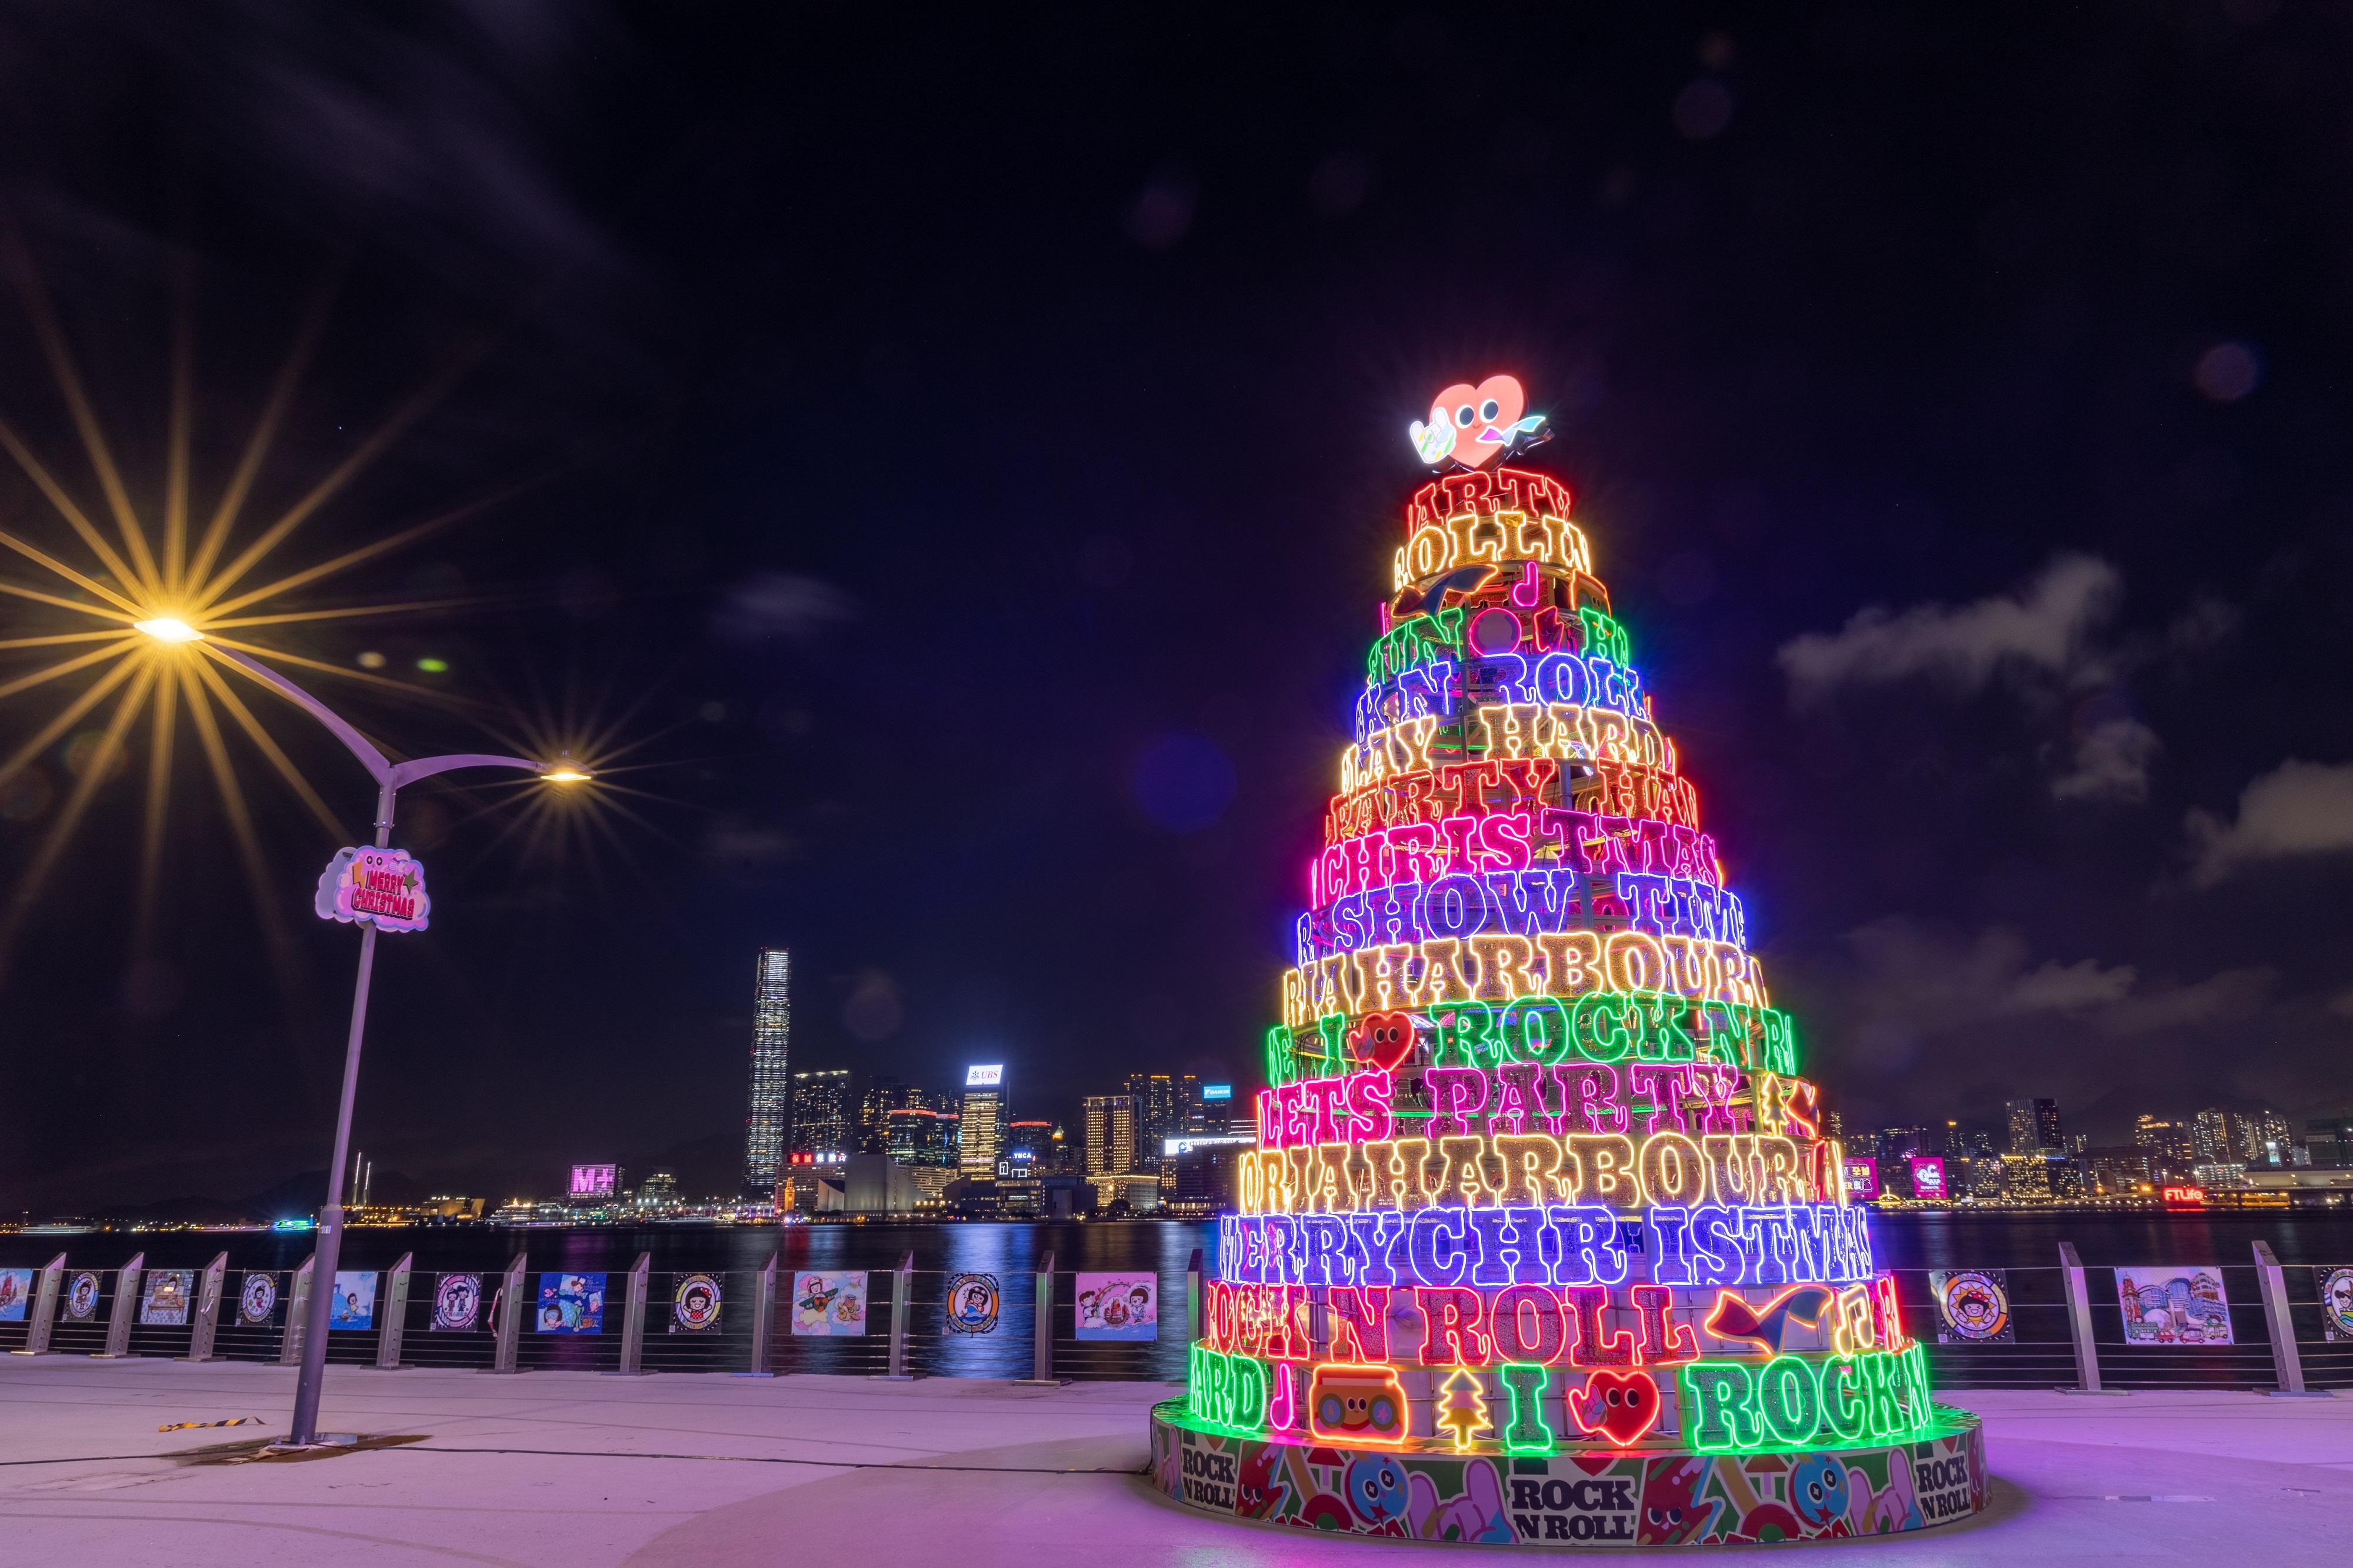 Inheriting the concept of Harbourfront is One and All, Christmas activities this year are held under the theme "Your Show Time" at seven harbourfront sites. Photo shows a Christmas tree with the theme of rock music at the Water Sports and Recreation Precinct in Wan Chai.